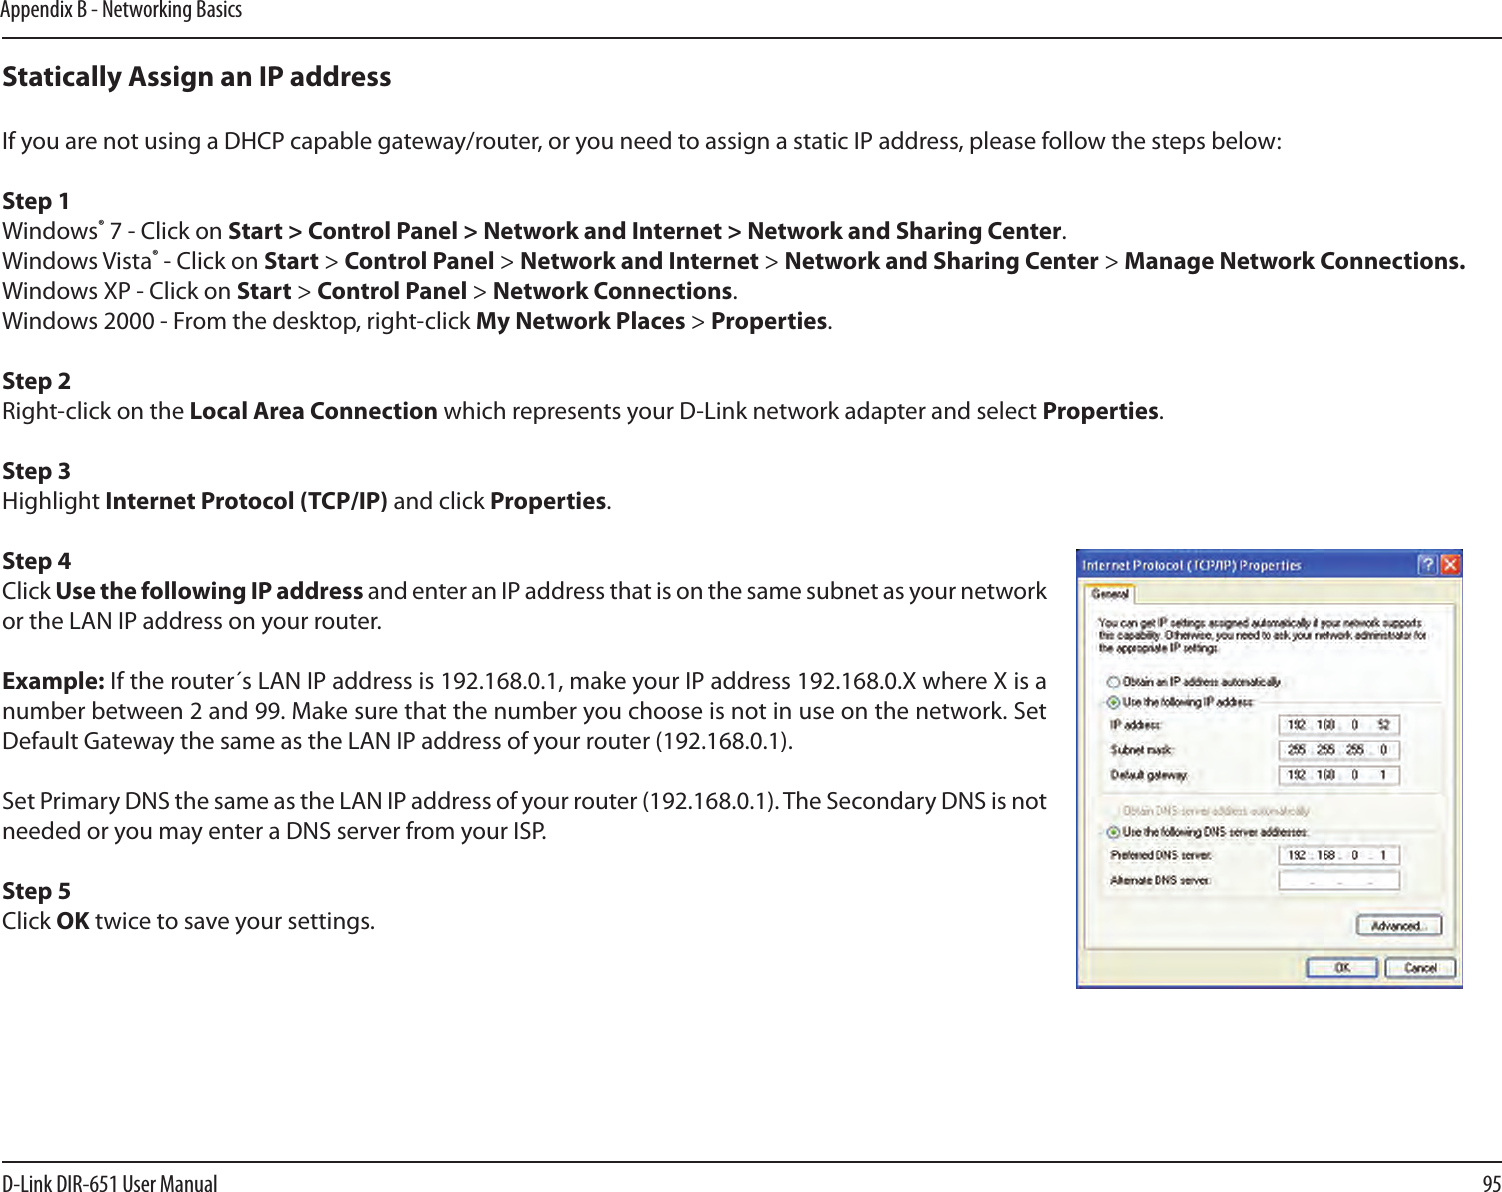 95D-Link DIR-651 User ManualAppendix B - Networking BasicsStatically Assign an IP addressIf you are not using a DHCP capable gateway/router, or you need to assign a static IP address, please follow the steps below:Step 1Windows® 7 - Click on Start &gt; Control Panel &gt; Network and Internet &gt; Network and Sharing Center.Windows Vista® - Click on Start &gt; Control Panel &gt; Network and Internet &gt; Network and Sharing Center &gt; Manage Network Connections.Windows XP - Click on Start &gt; Control Panel &gt; Network Connections.Windows 2000 - From the desktop, right-click My Network Places &gt; Properties.Step 2Right-click on the Local Area Connection which represents your D-Link network adapter and select Properties.Step 3Highlight Internet Protocol (TCP/IP) and click Properties.Step 4Click Use the following IP address and enter an IP address that is on the same subnet as your network or the LAN IP address on your router. Example: If the router´s LAN IP address is 192.168.0.1, make your IP address 192.168.0.X where X is a number between 2 and 99. Make sure that the number you choose is not in use on the network. Set Default Gateway the same as the LAN IP address of your router (192.168.0.1). Set Primary DNS the same as the LAN IP address of your router (192.168.0.1). The Secondary DNS is not needed or you may enter a DNS server from your ISP.Step 5Click OK twice to save your settings.